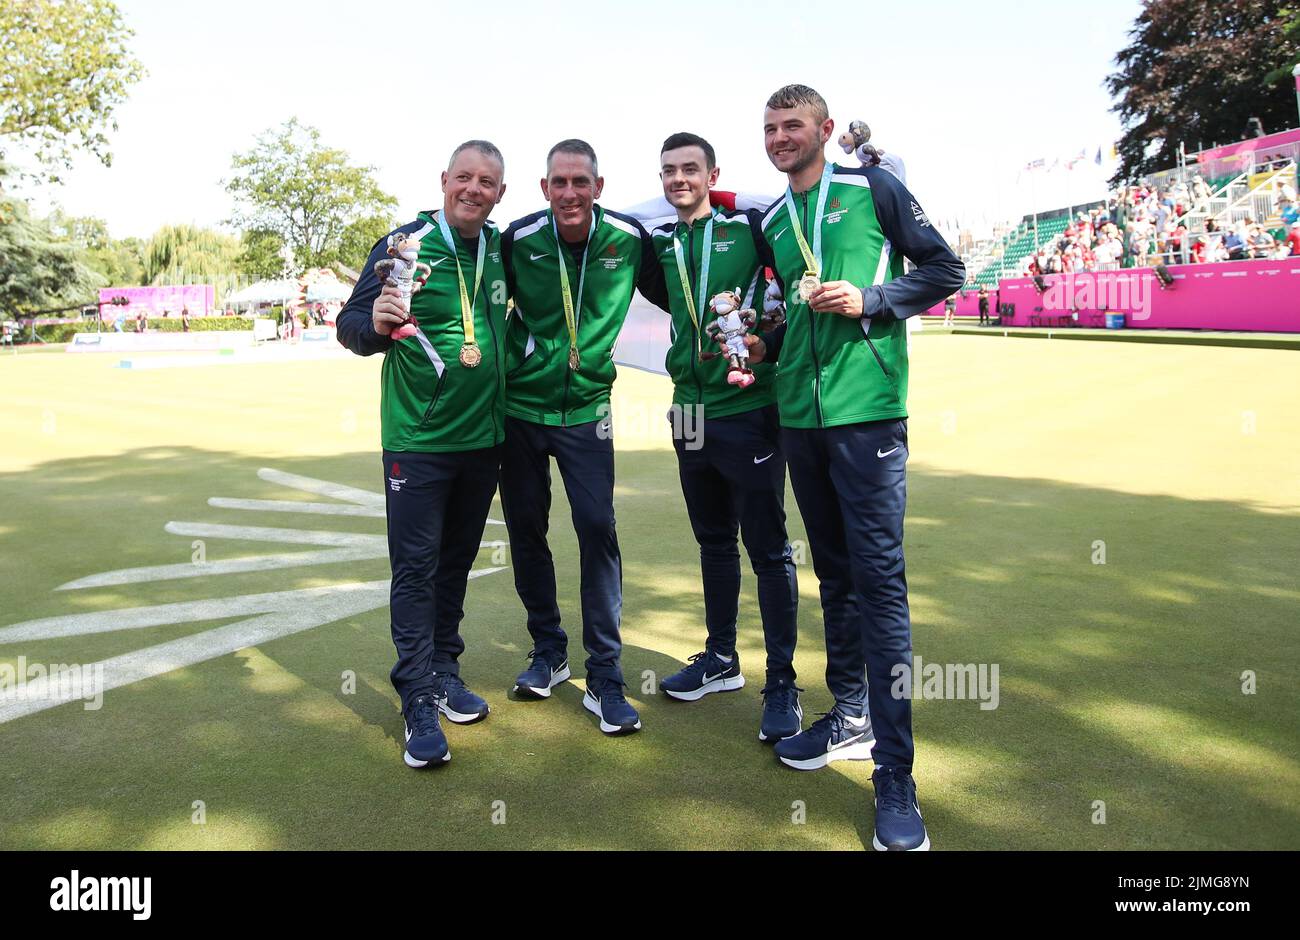 Northern Ireland’s Ian McClure, Adam McKeown, Sam Barkley and Martin McHugh pose on for a photograph after winning a gold medal during Men's Fours Lawn Bowls - medal ceremony at Victoria Park on day nine of the 2022 Commonwealth Games in Birmingham. Picture date: Saturday August 6, 2022. Stock Photo